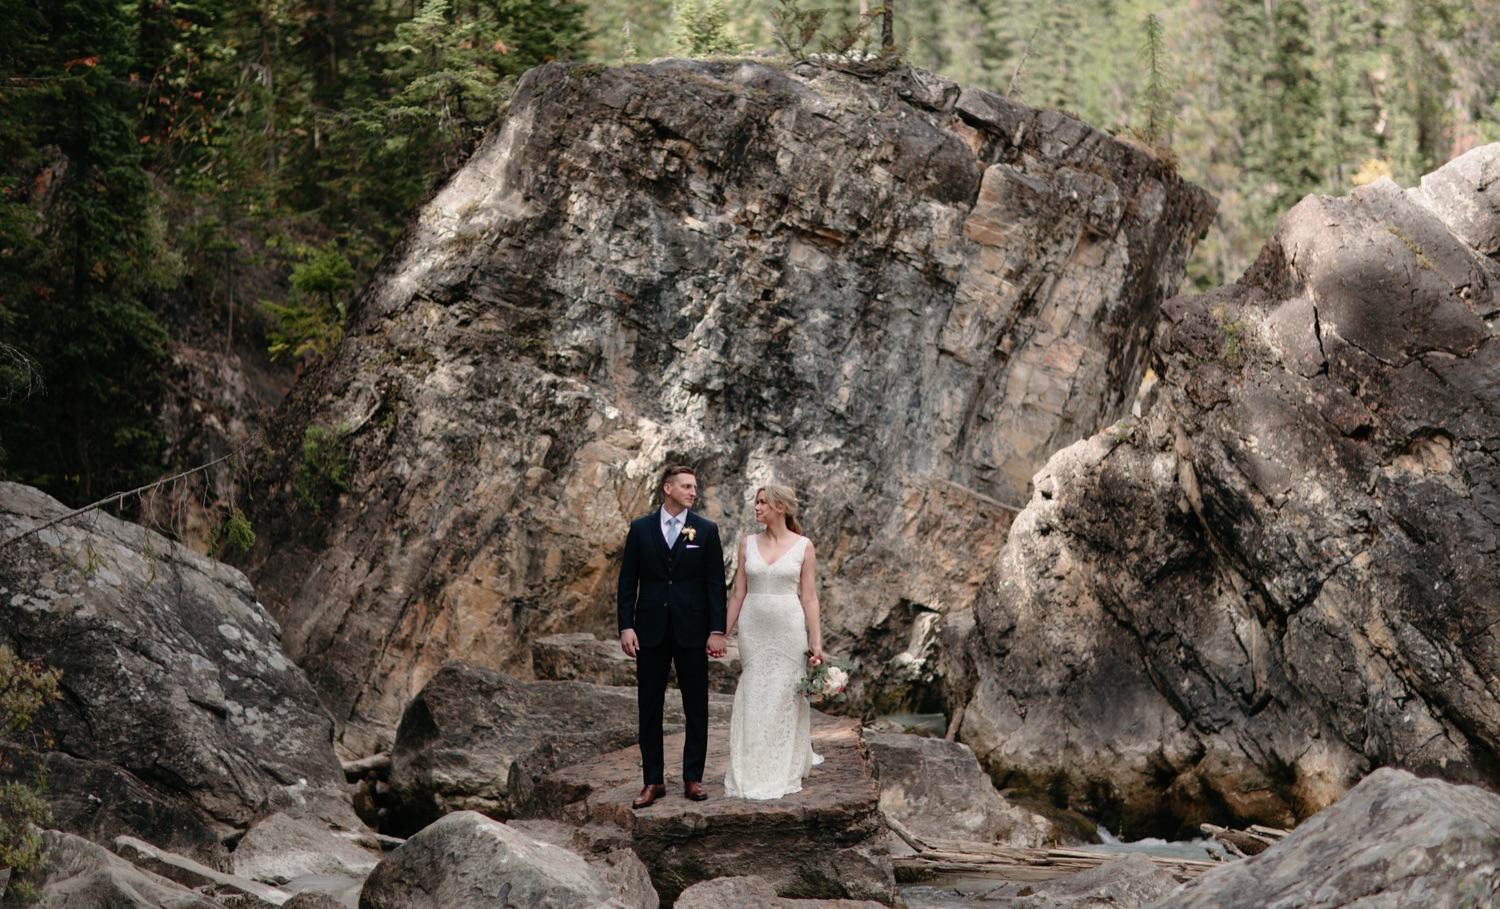 Newly eloped couple posing near Cathedral Mountain Lodge near a toppled boulder